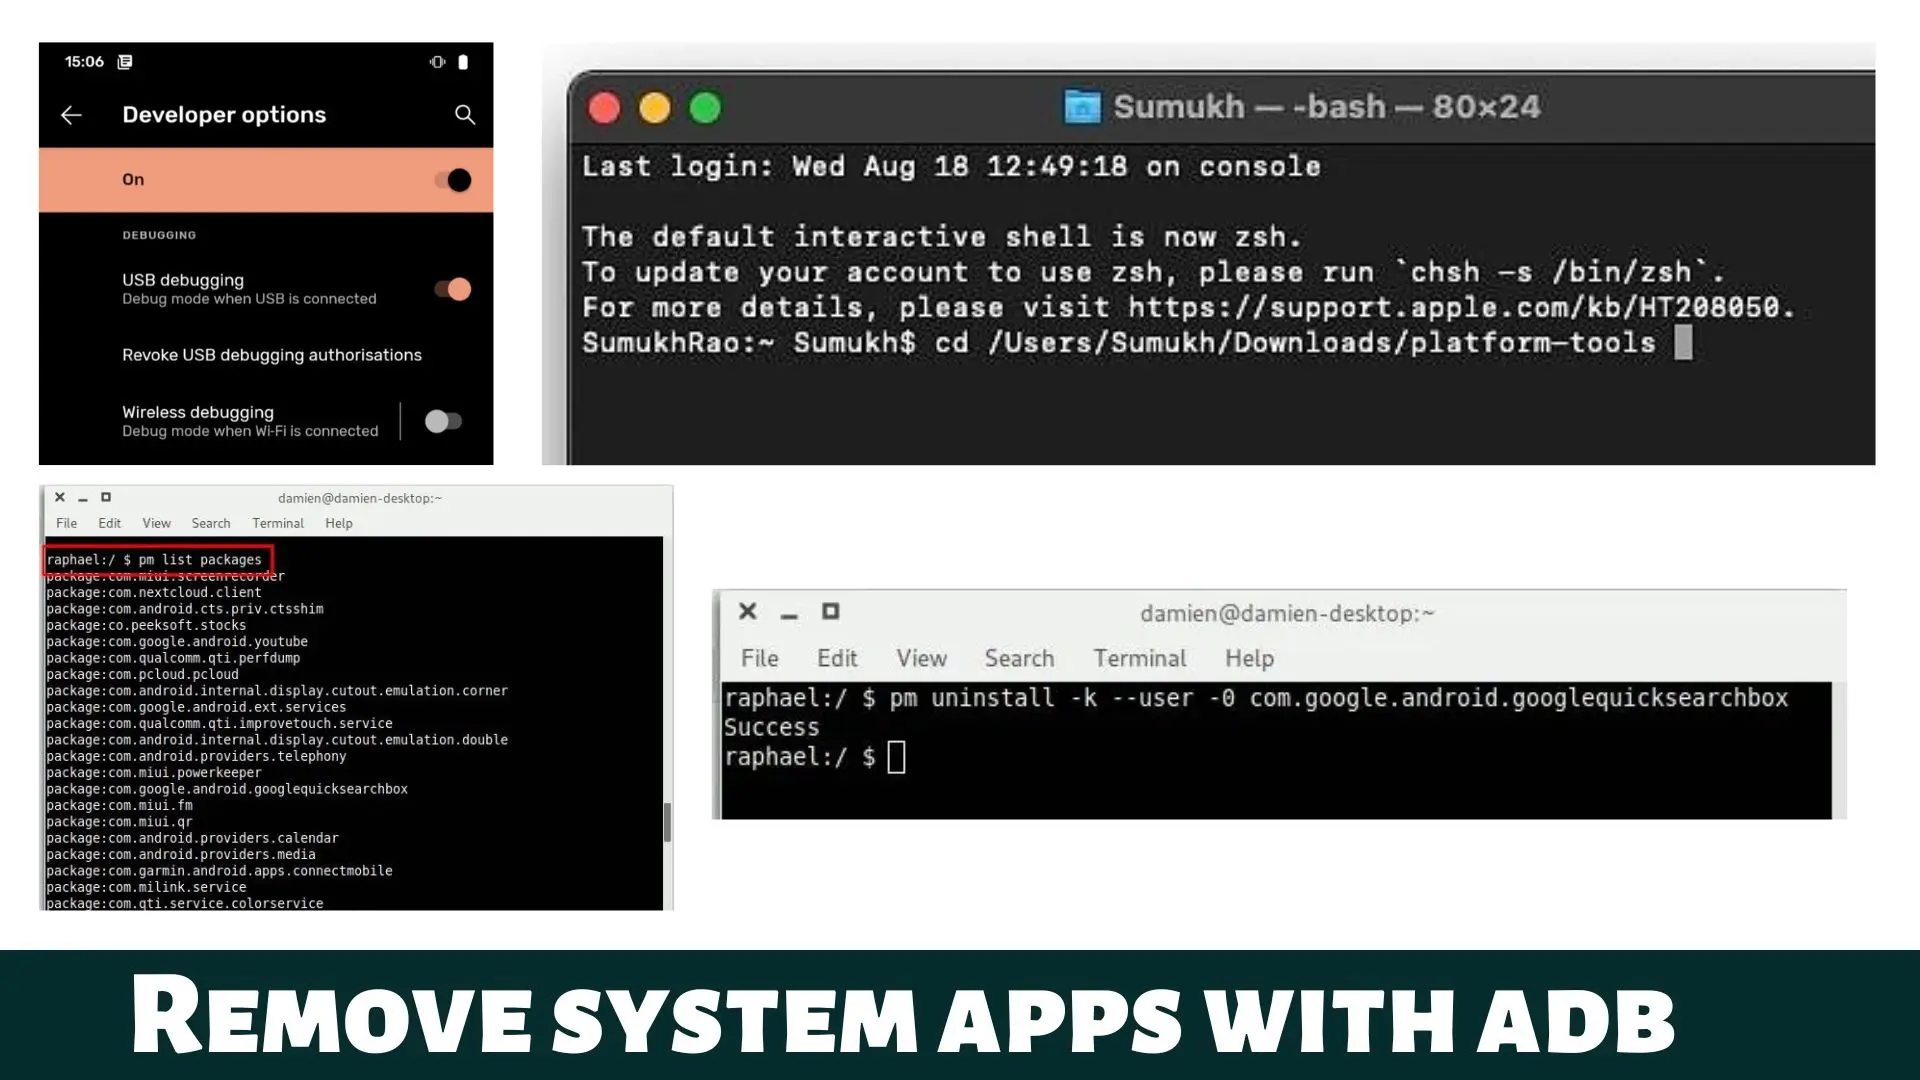 Remove system applications with ADB